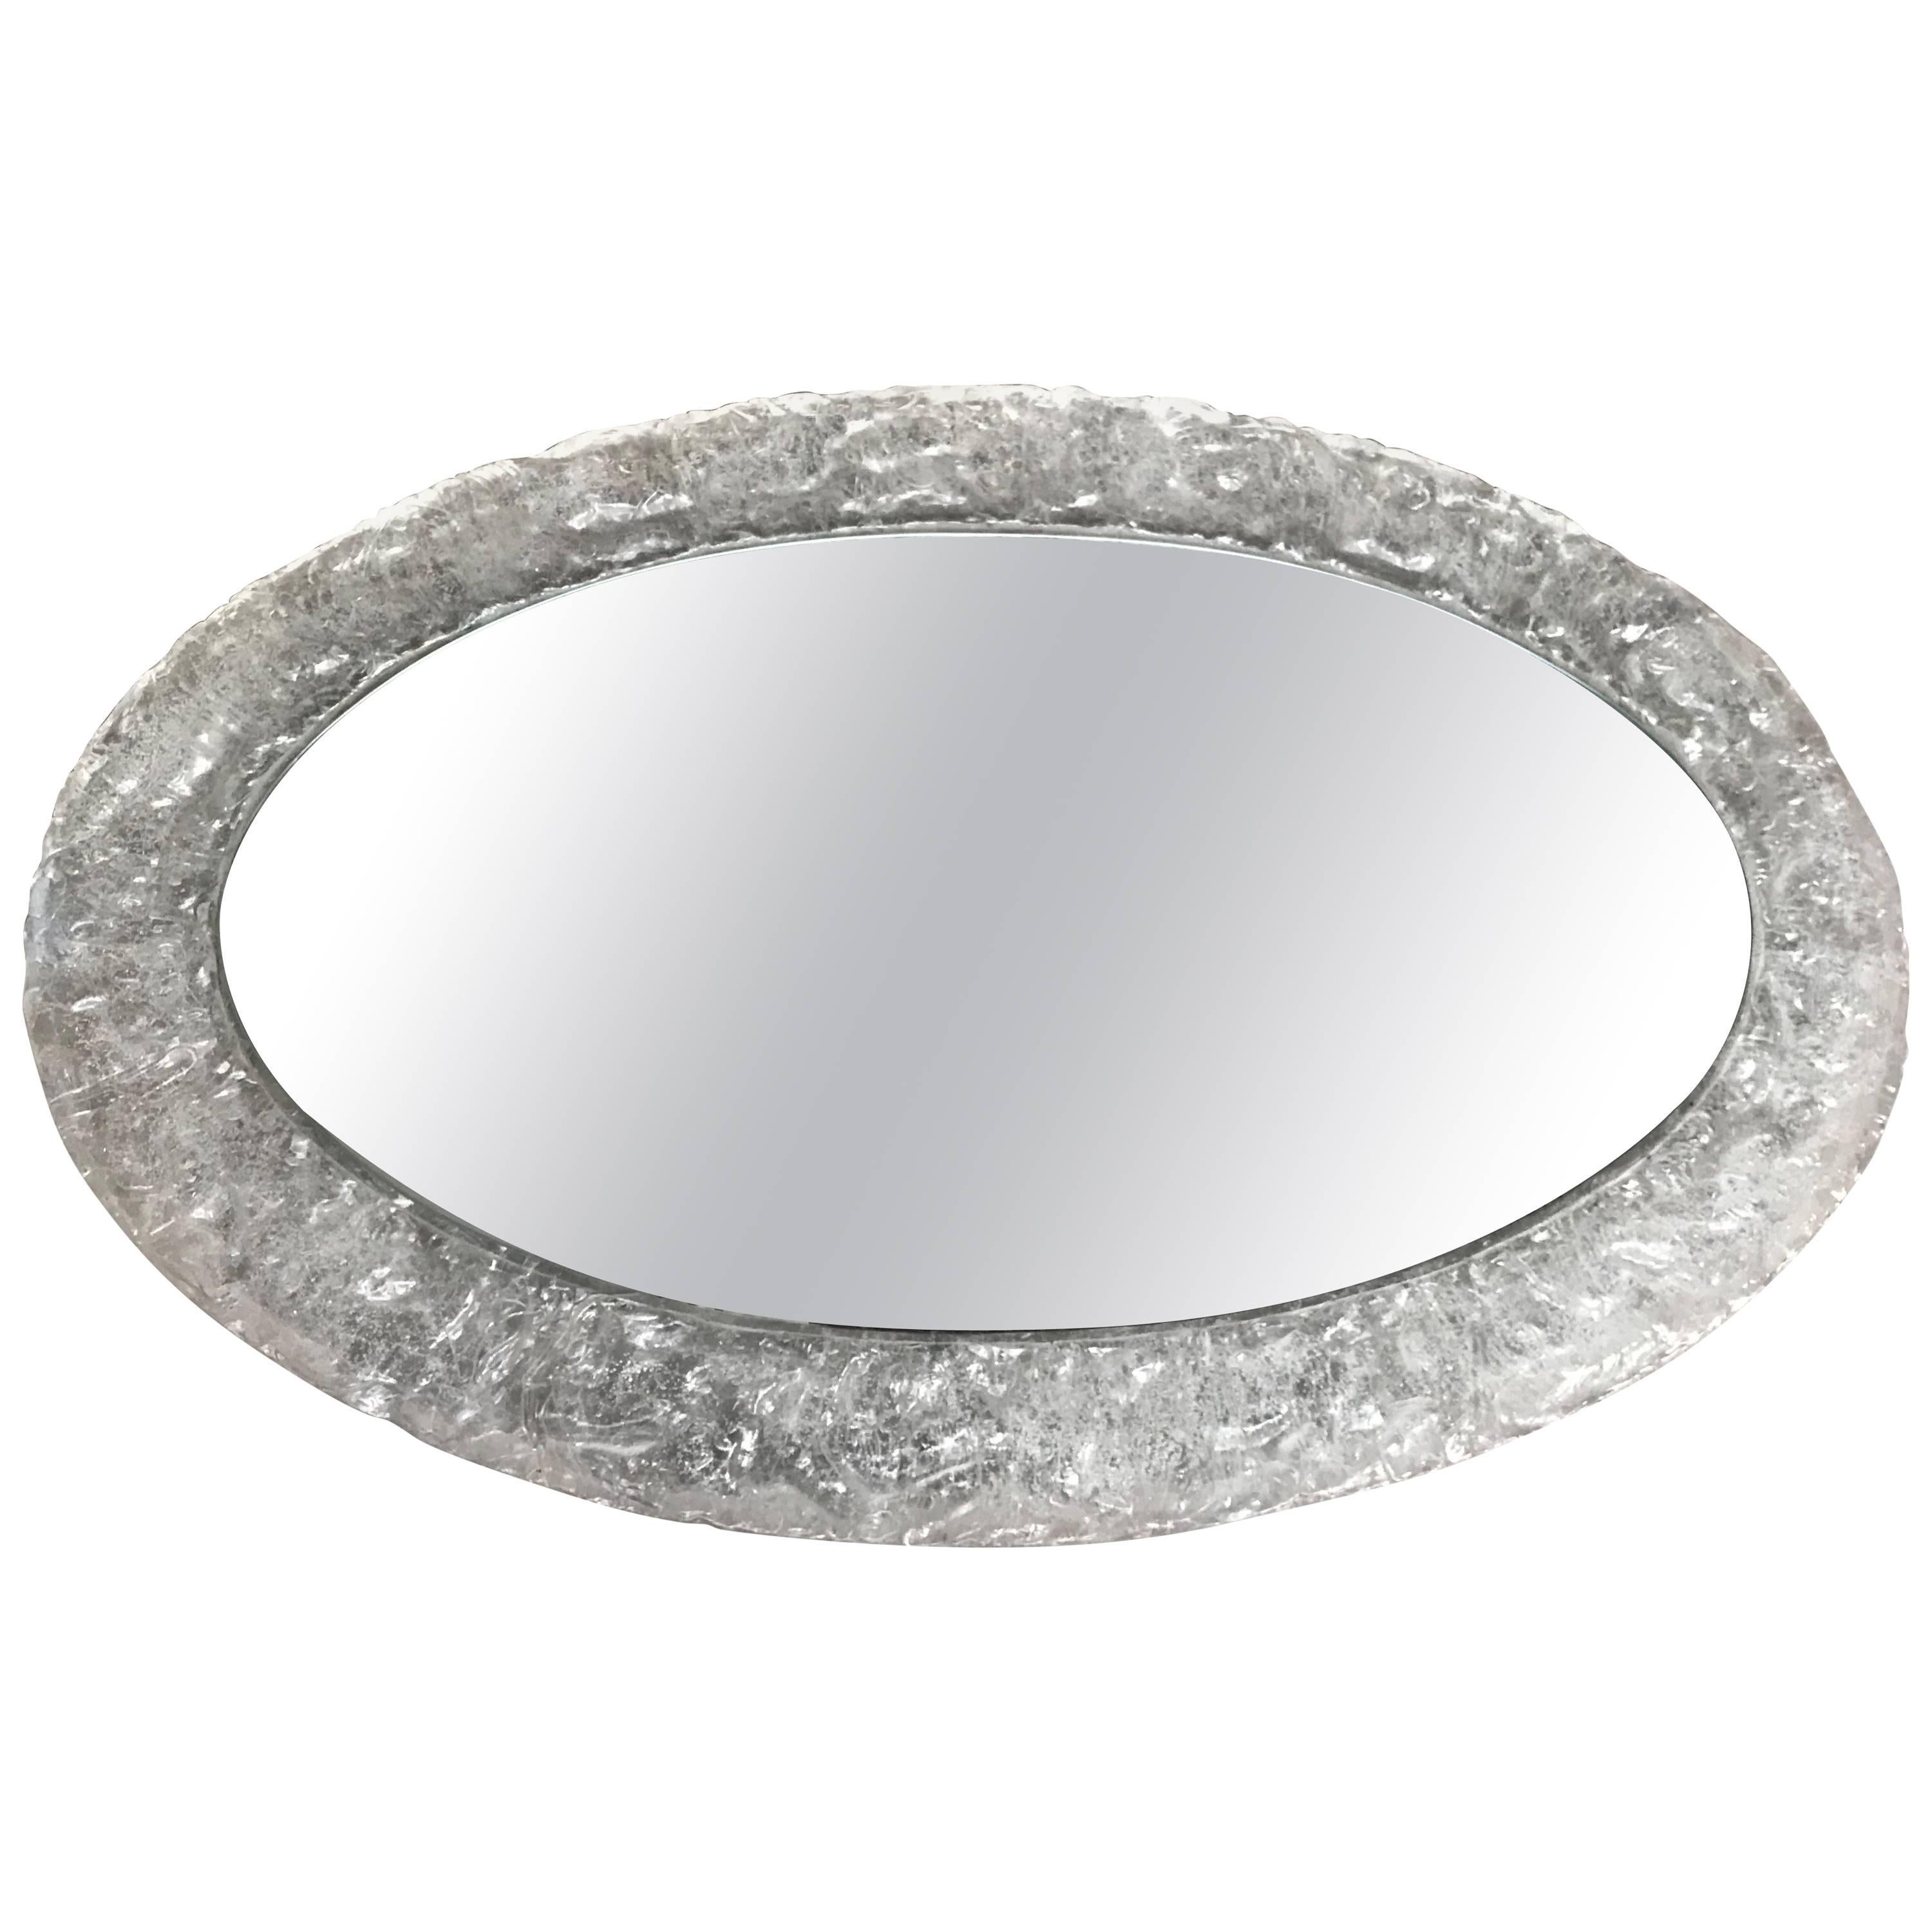 Rare Midcentury Design Oval Mirror in Faux Glass Frame with Frosted Ice Pattern For Sale